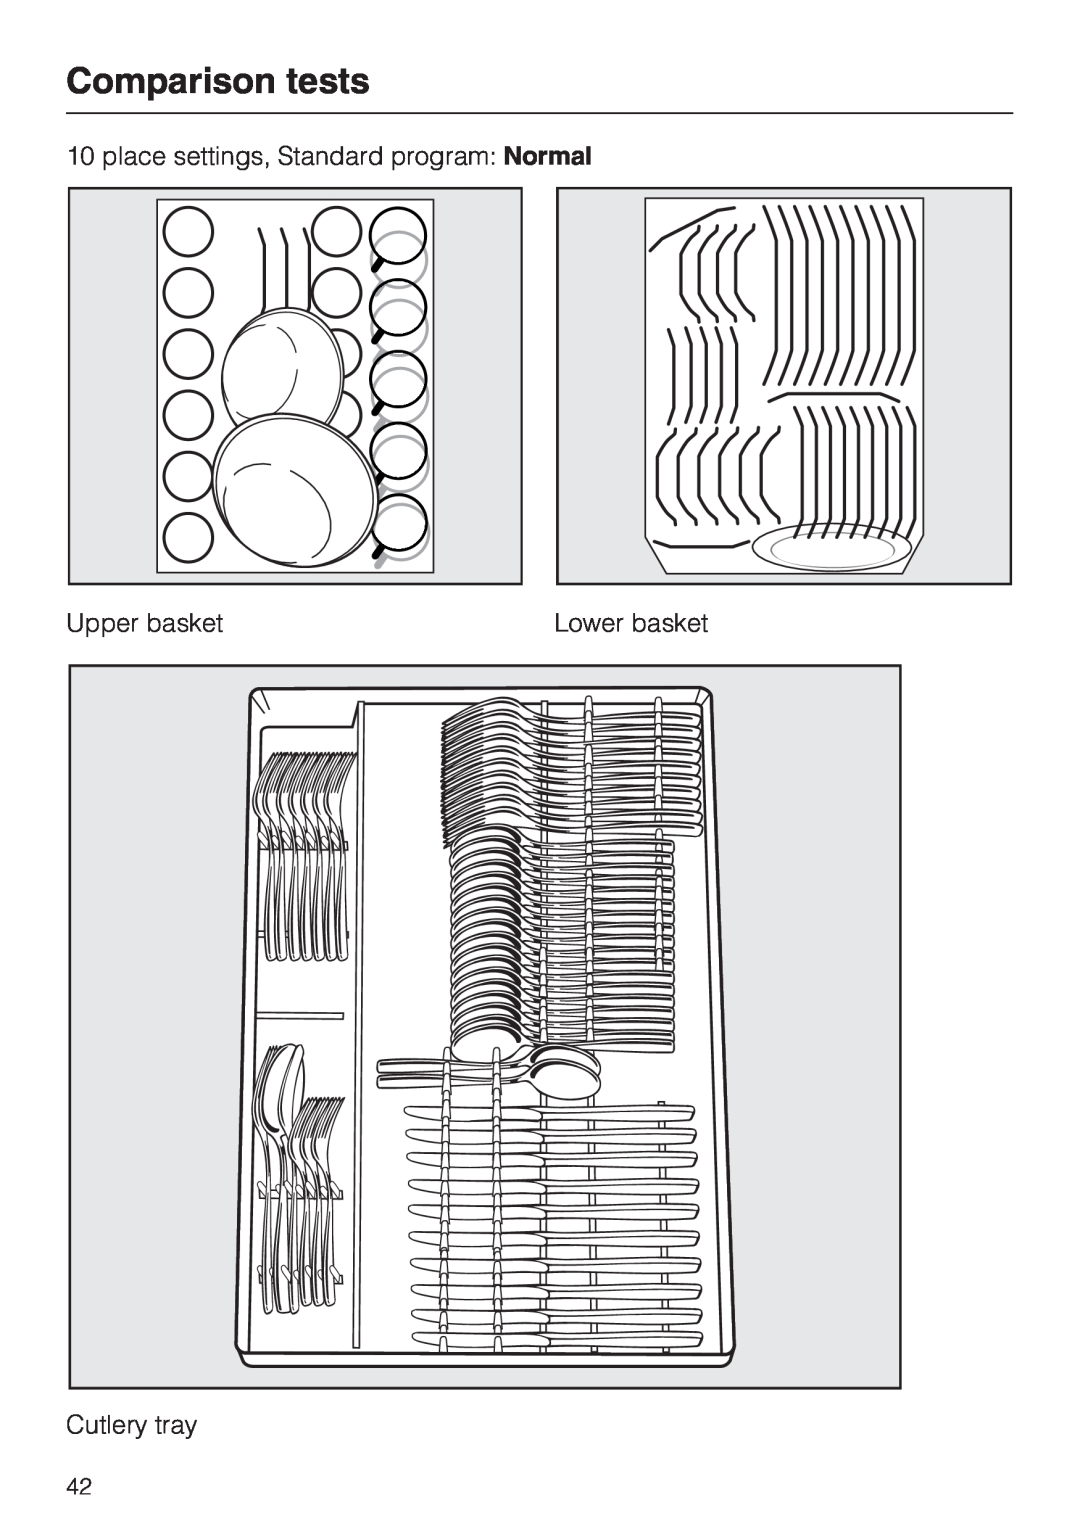 Miele G 1262 manual Comparison tests, place settings, Standard program Normal, Upper basket, Lower basket, Cutlery tray 